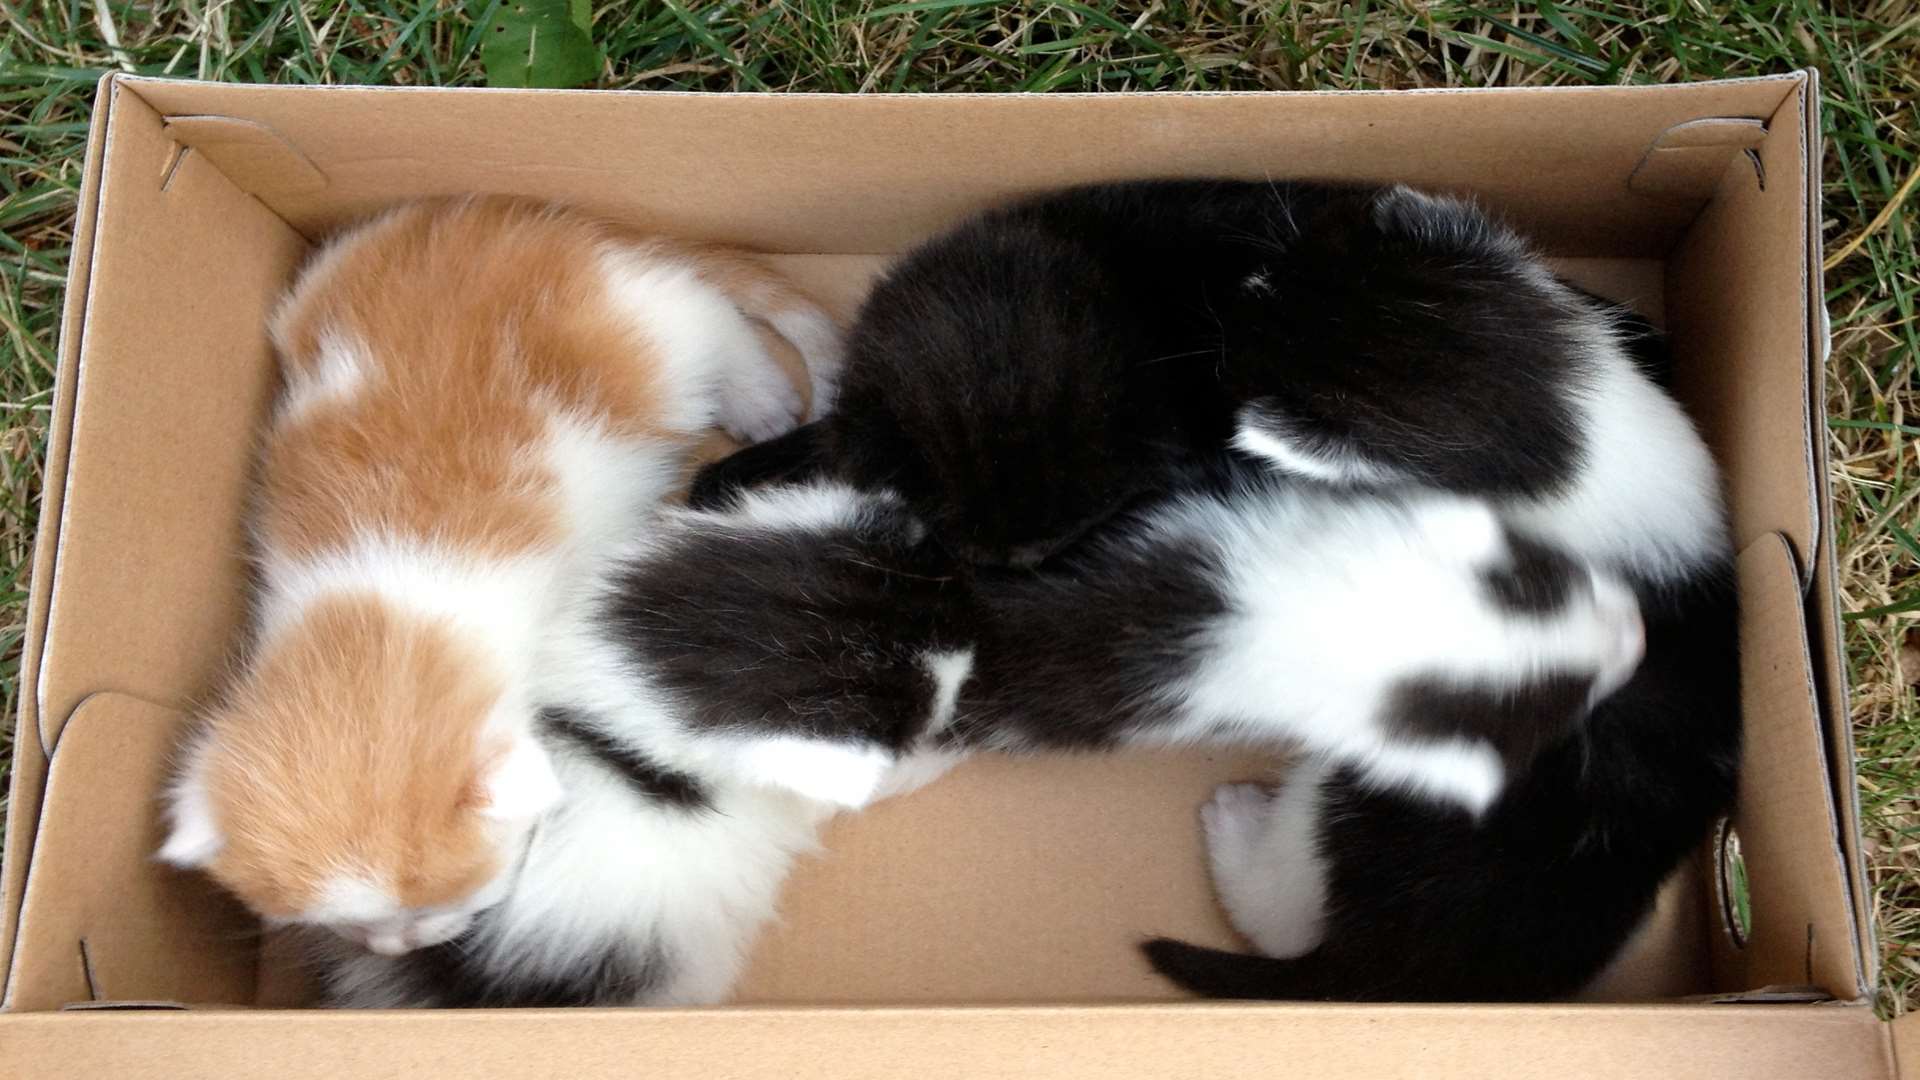 The kitten has been reunited with his brothers and sisters